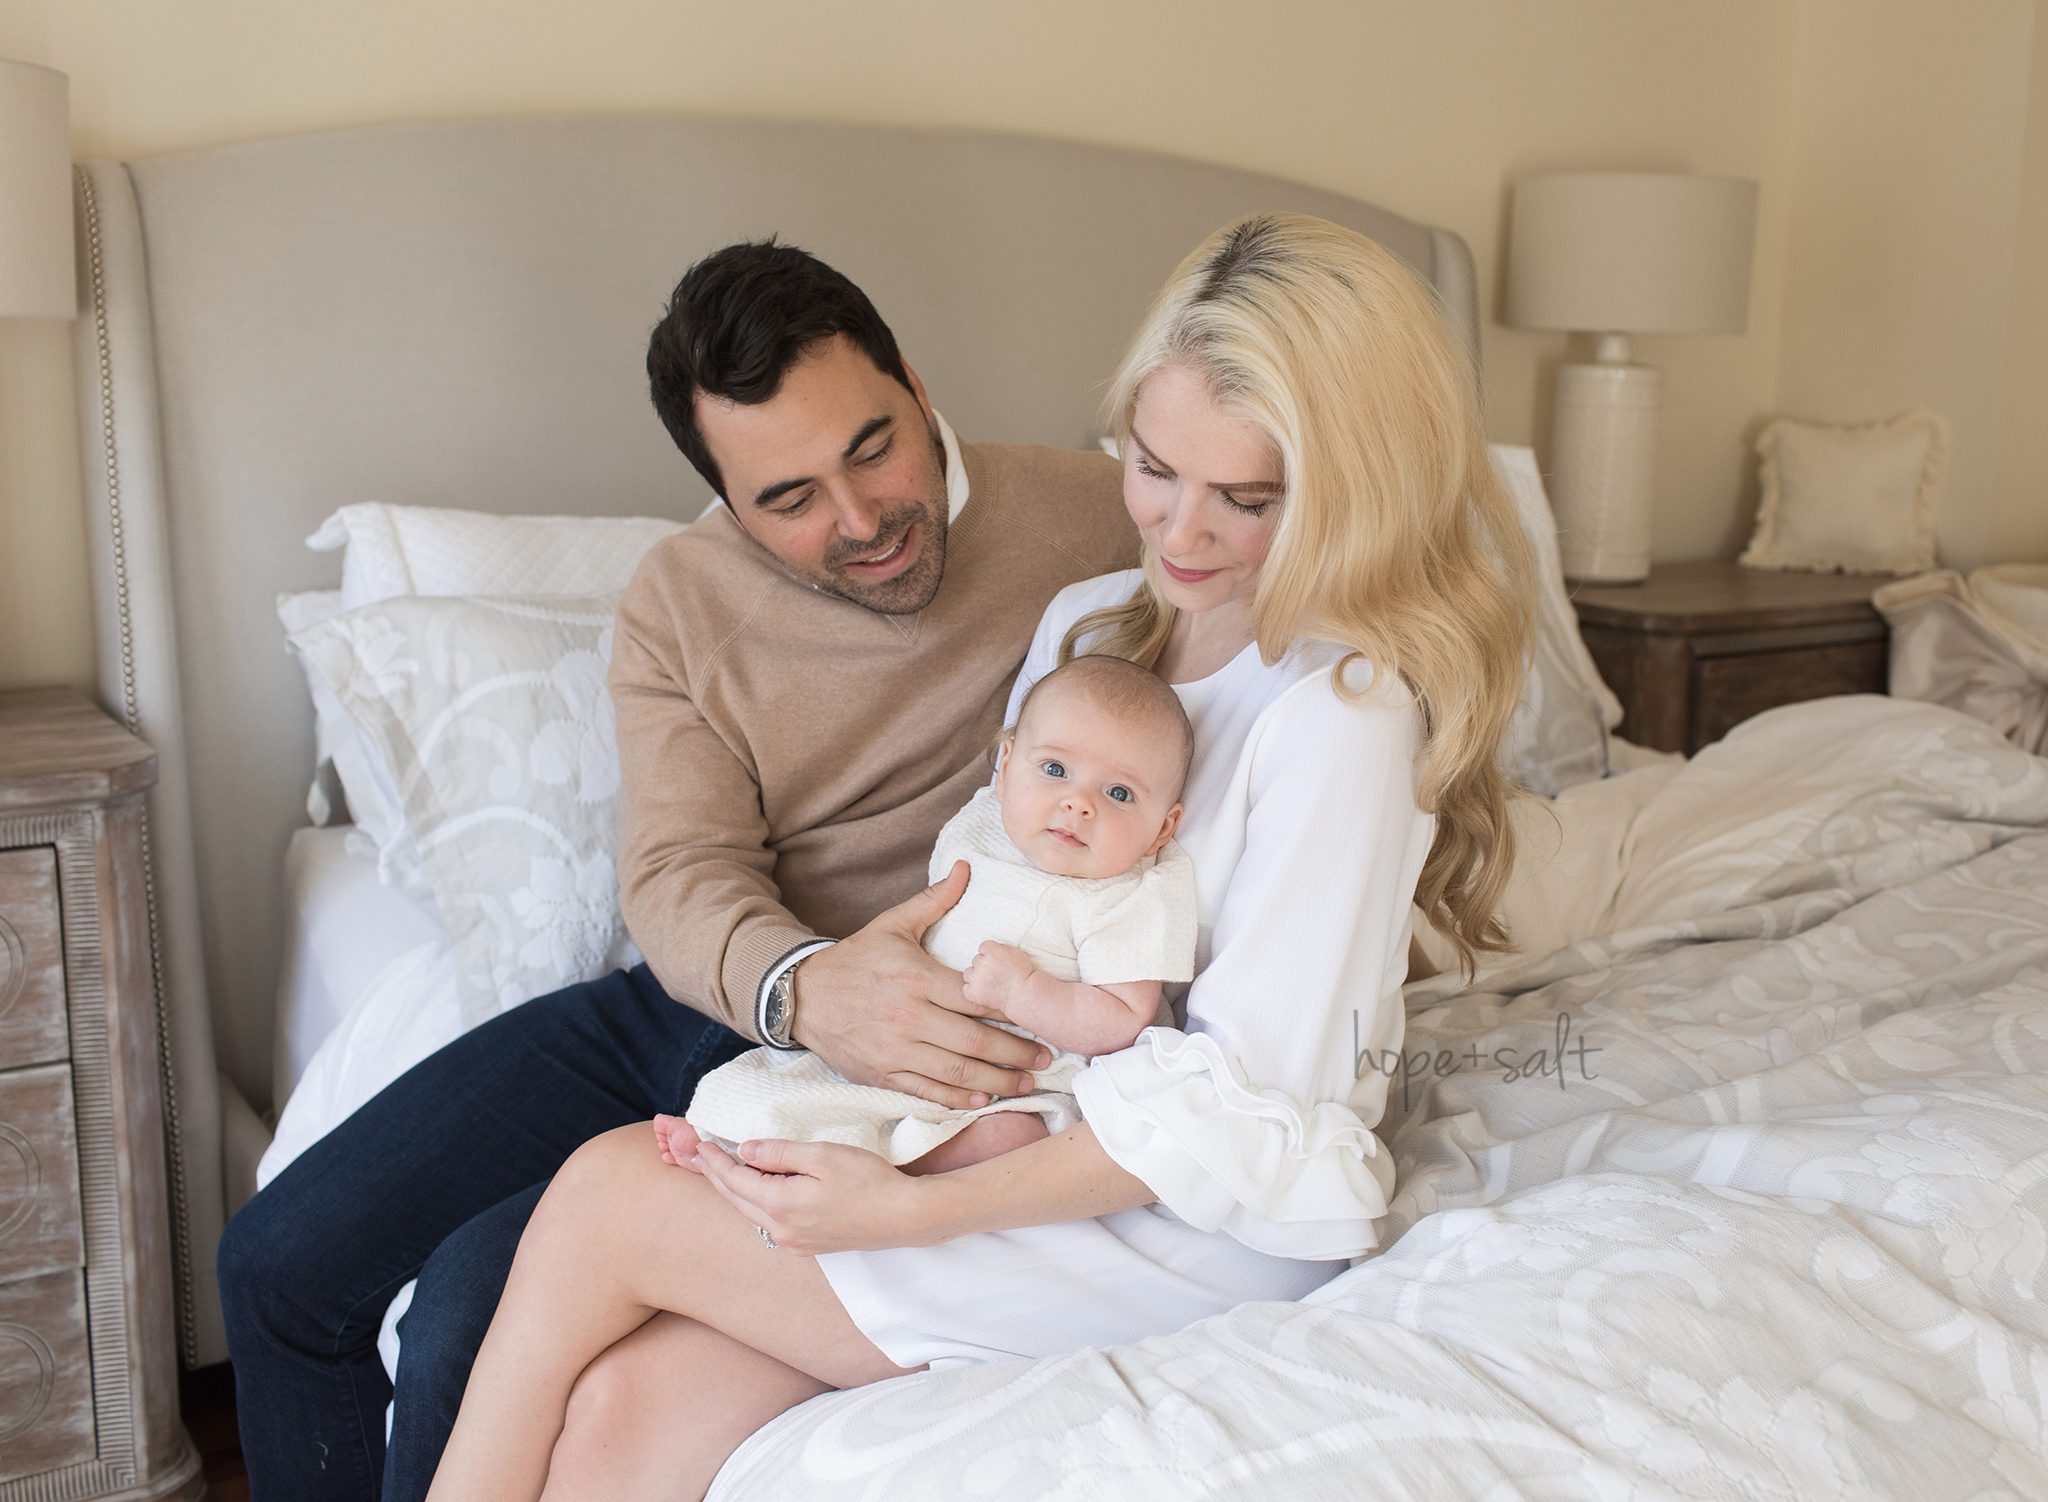 oakville ontario lifestyle family photographer - three month old baby girl Maeve with mom and dad in home session by Hope and Salt